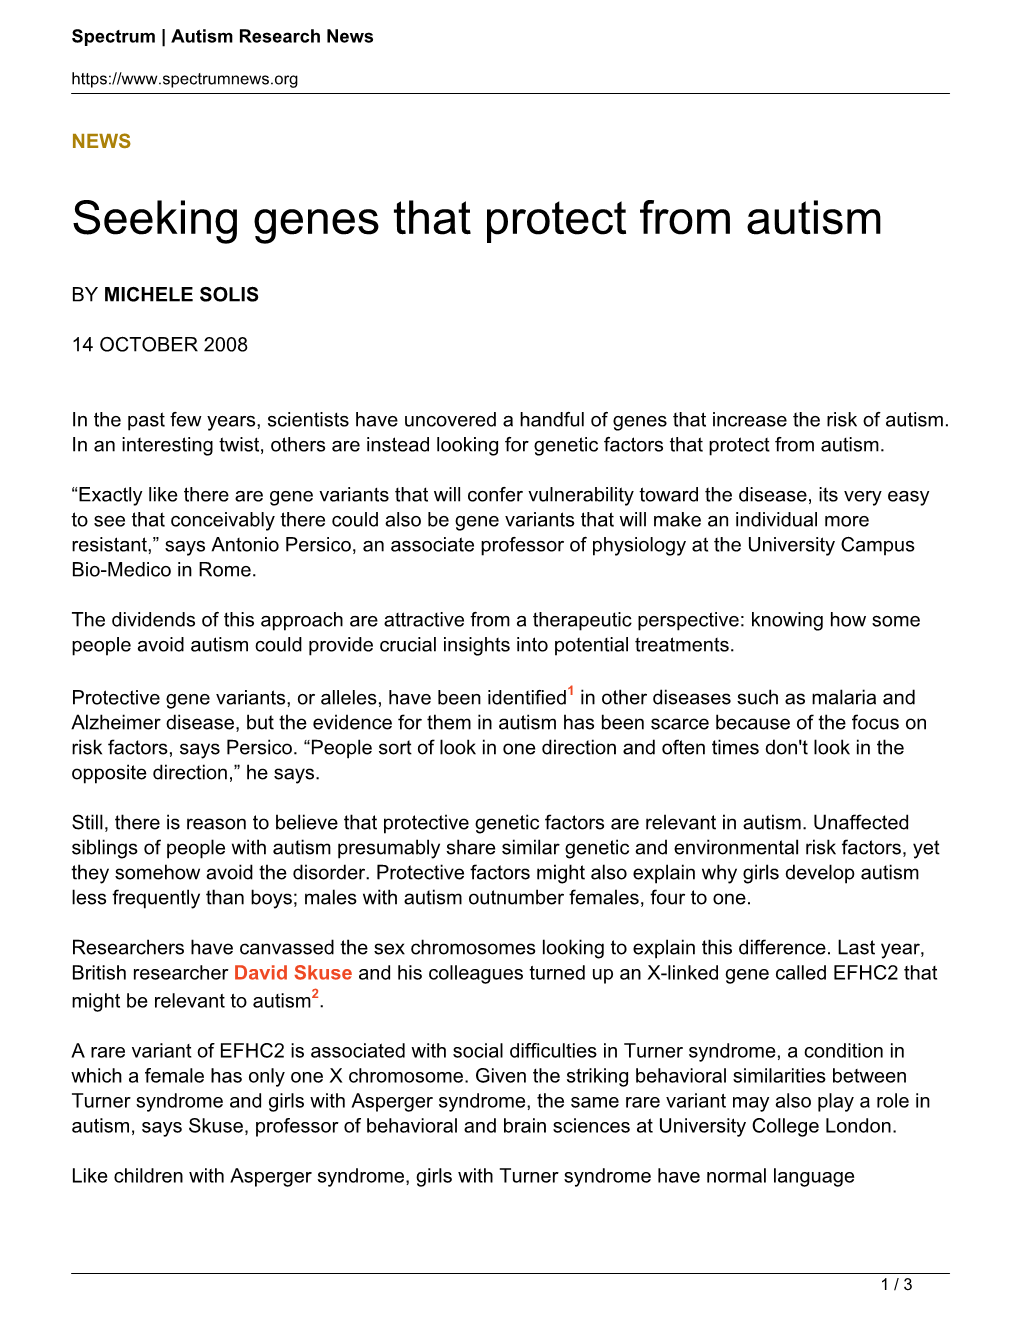 Seeking Genes That Protect from Autism